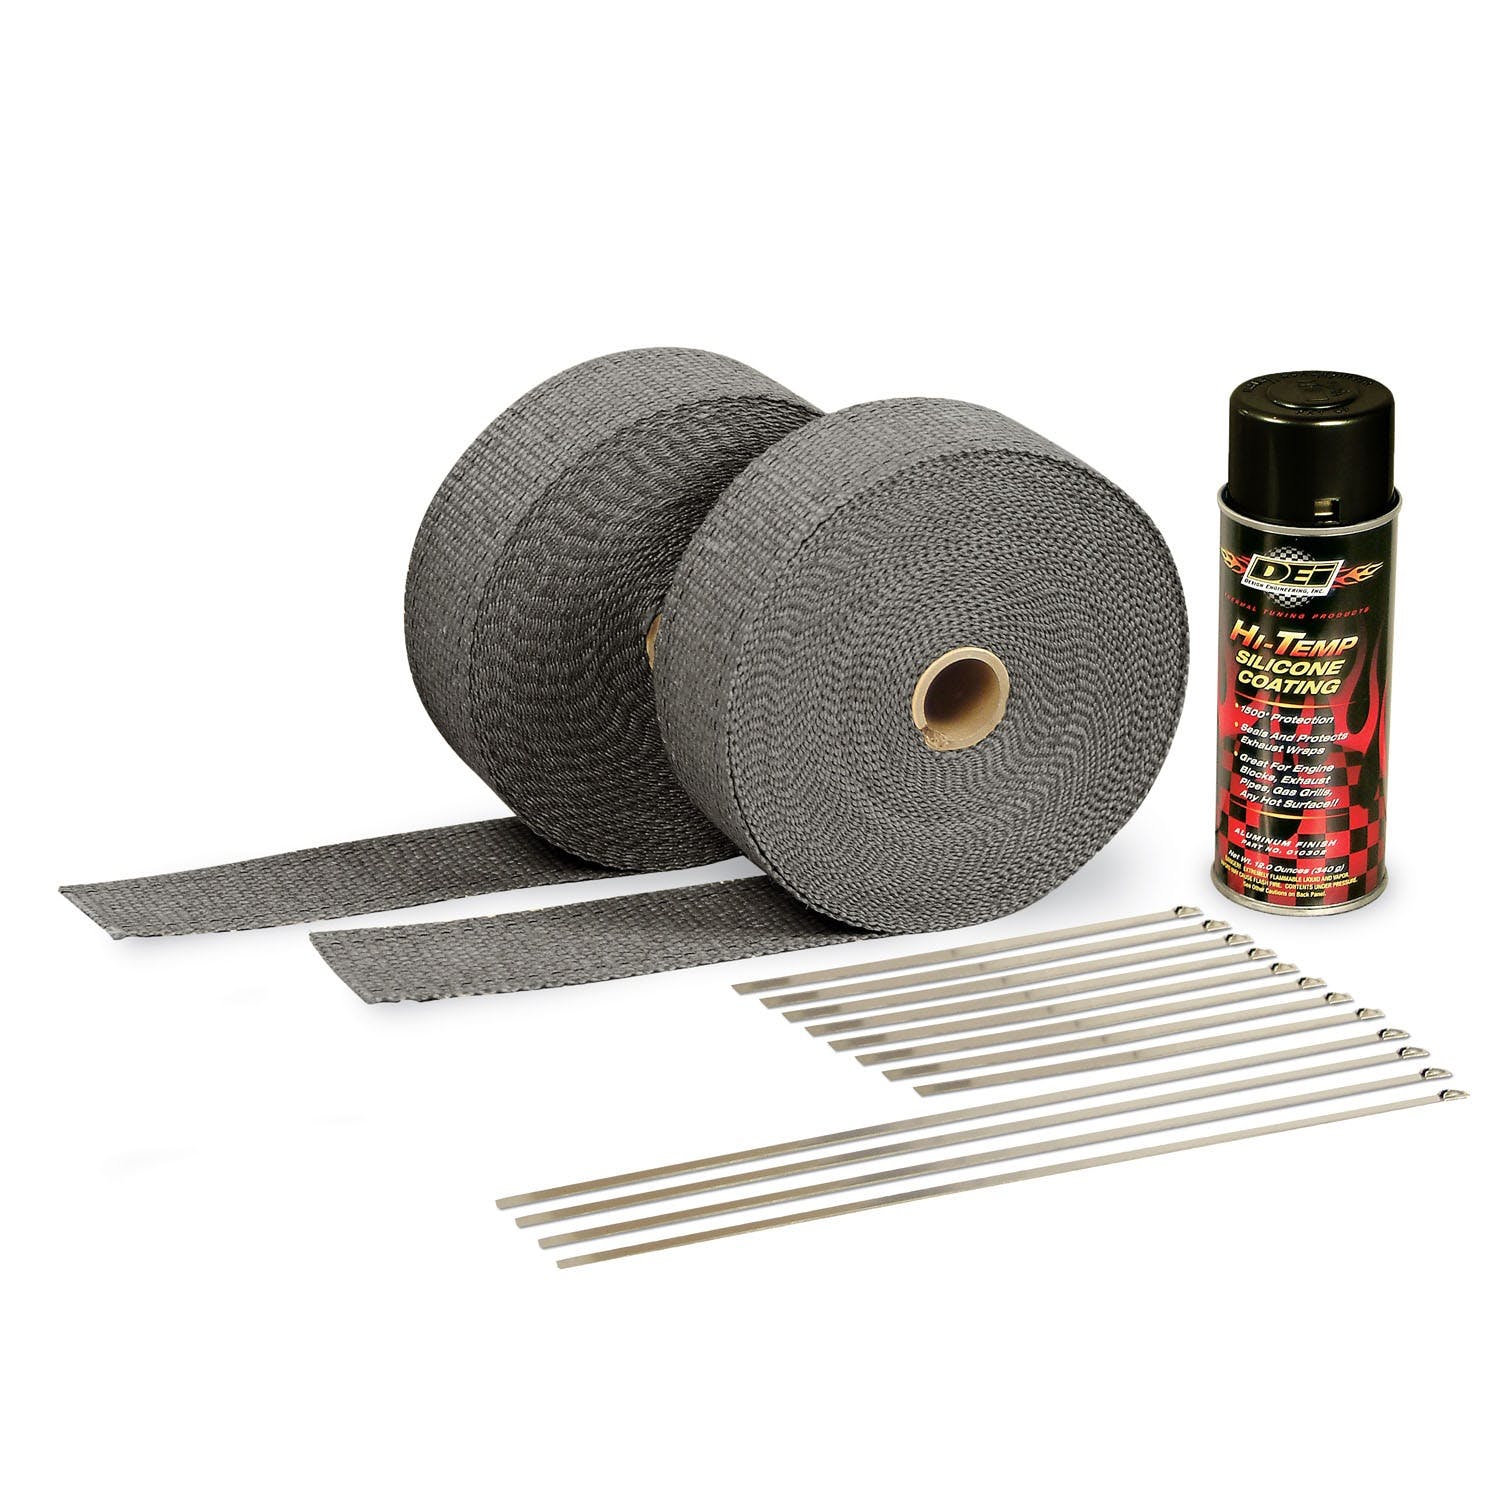 Design Engineering, Inc. 10110 Exhaust Wrap Kit - with Black Wrap and Black HT Silicone Coating